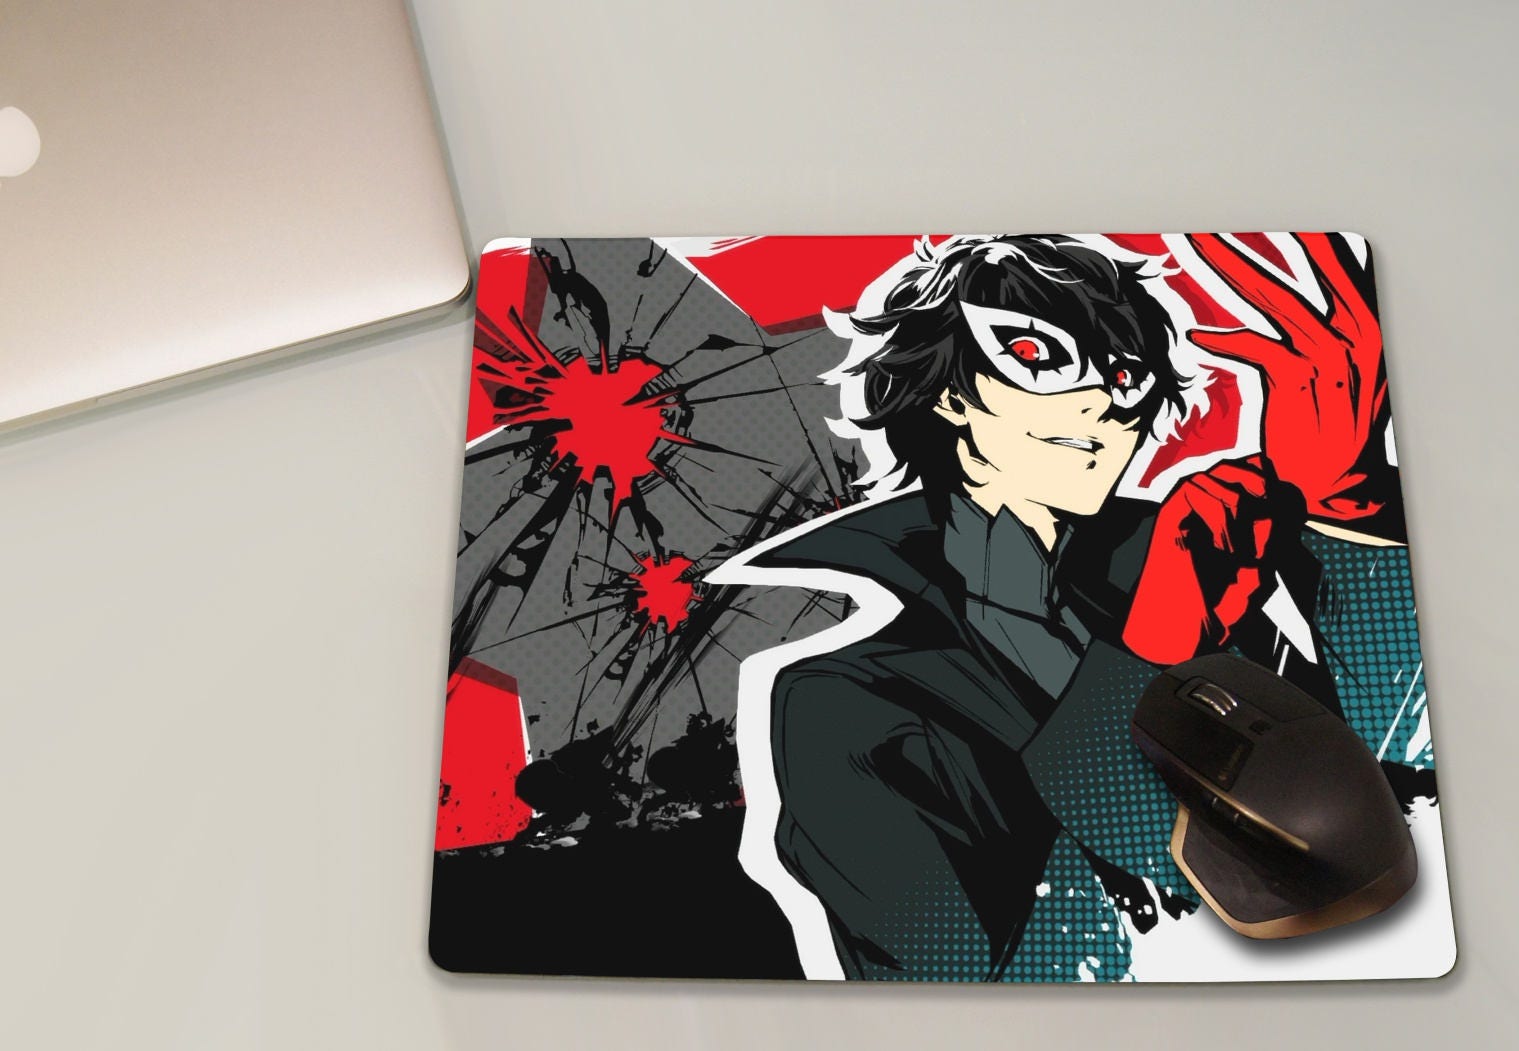 Persona 5 inspired Mouse Pad Top Quality Big Size up to